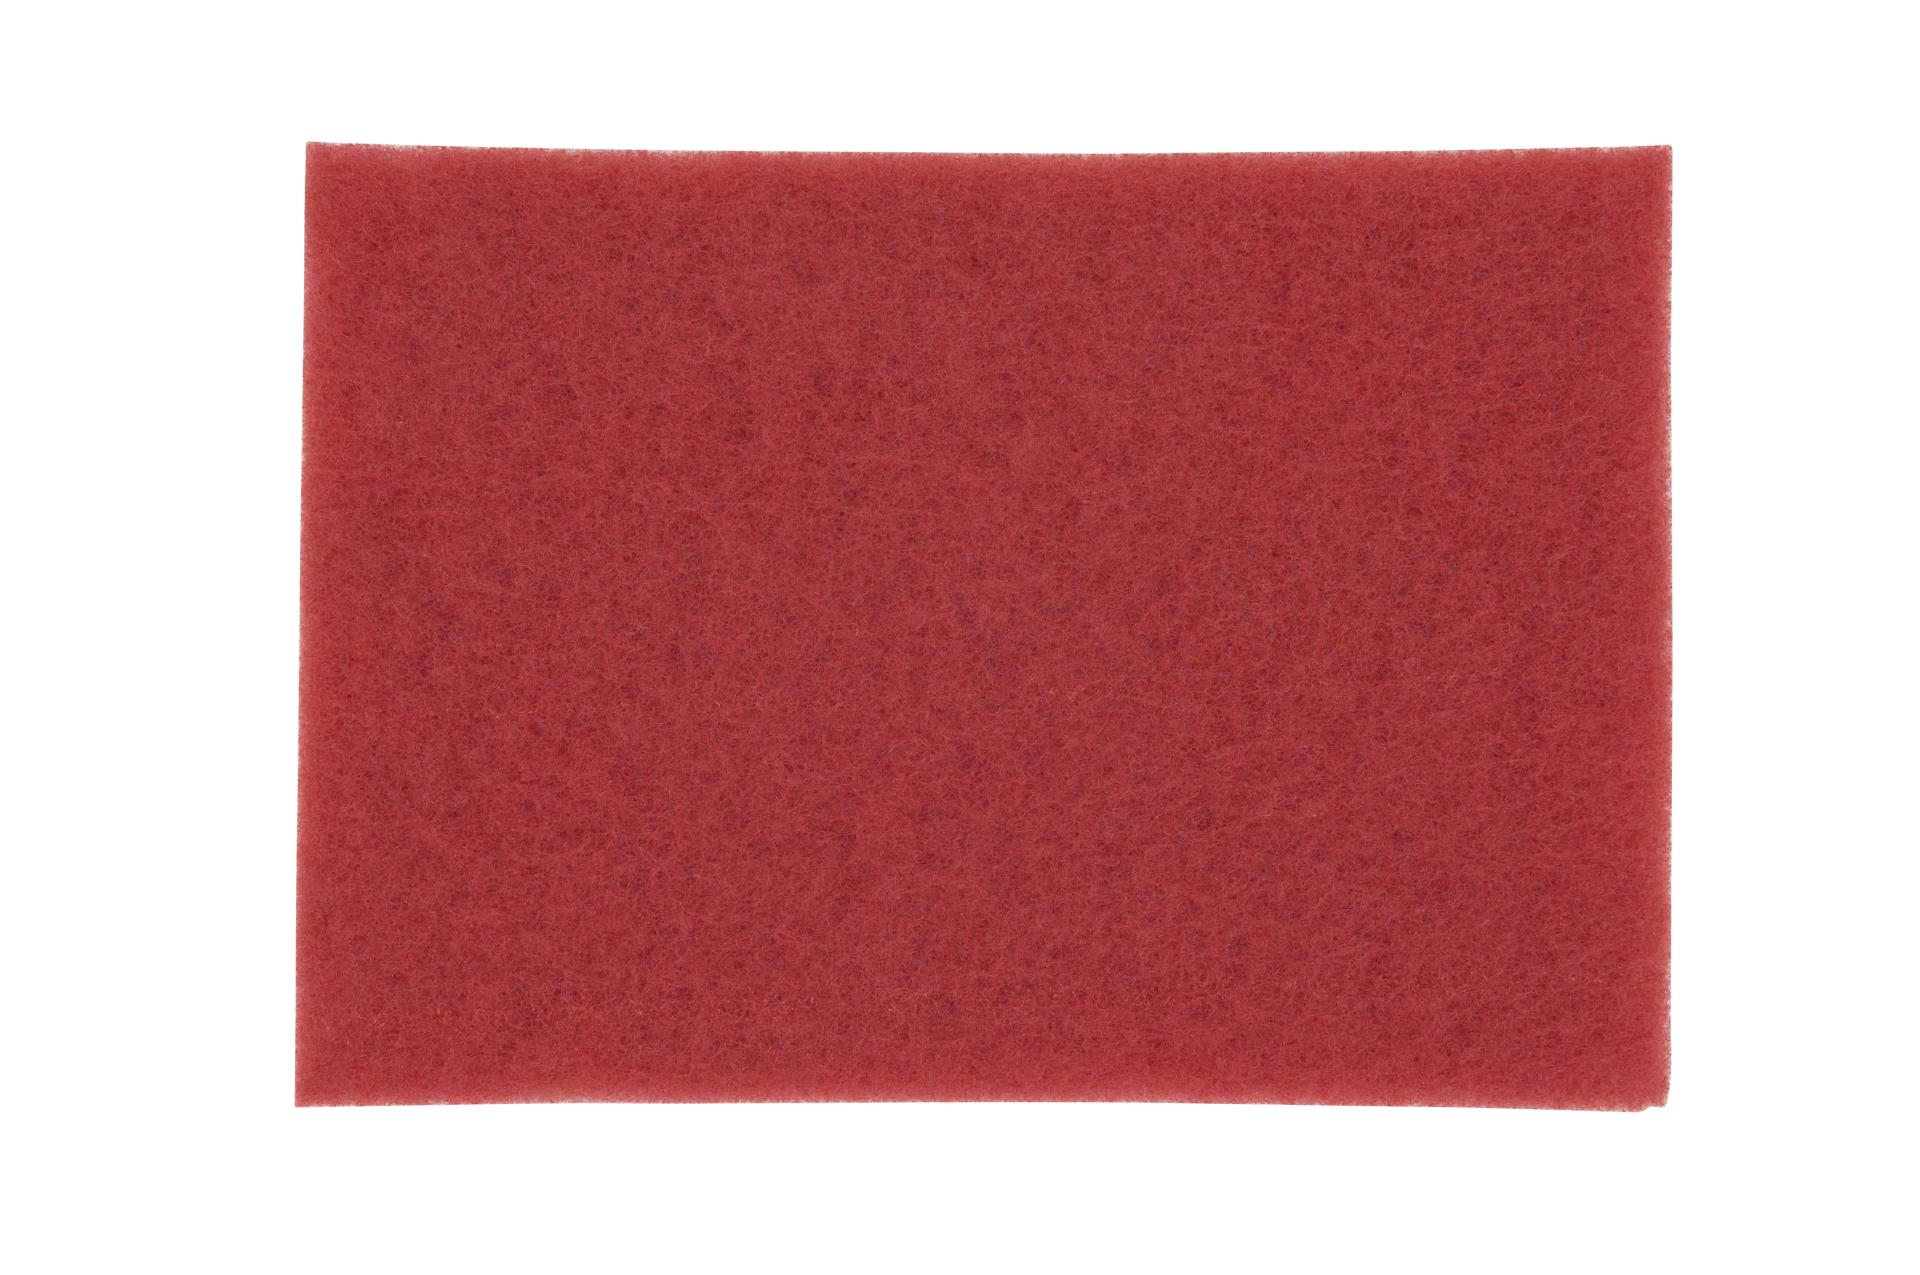 50048011258176 3M™ Red Buffer Pad 5100, 12 in x 18 in, 5/Case Aircraft  products floor-pads 9358759